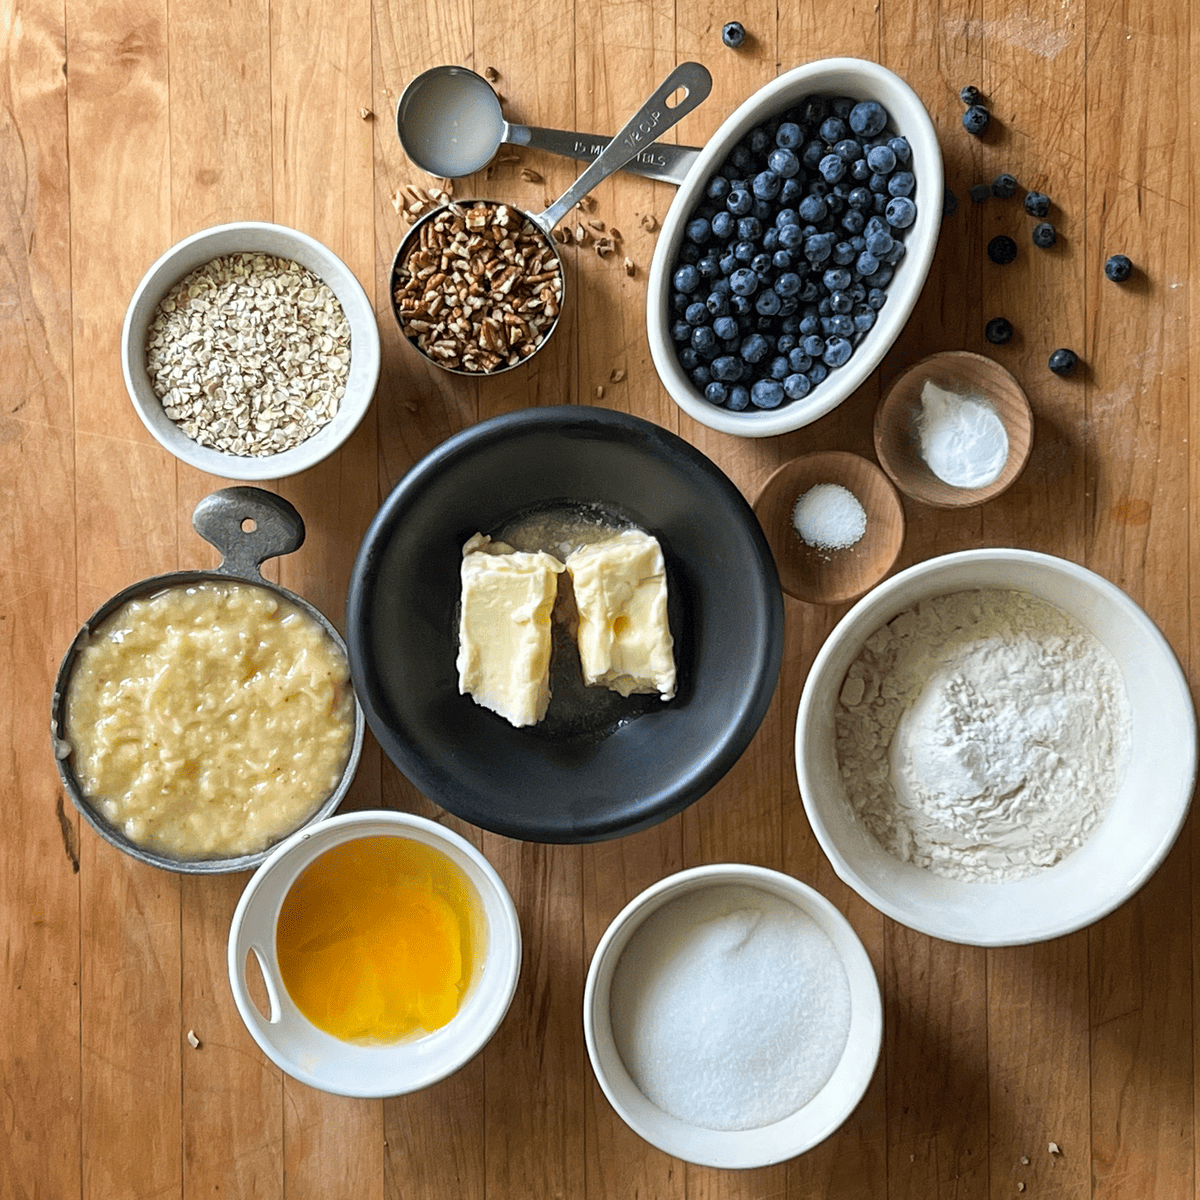 Ingredients for blueberry banana bread laid on wood countertop.